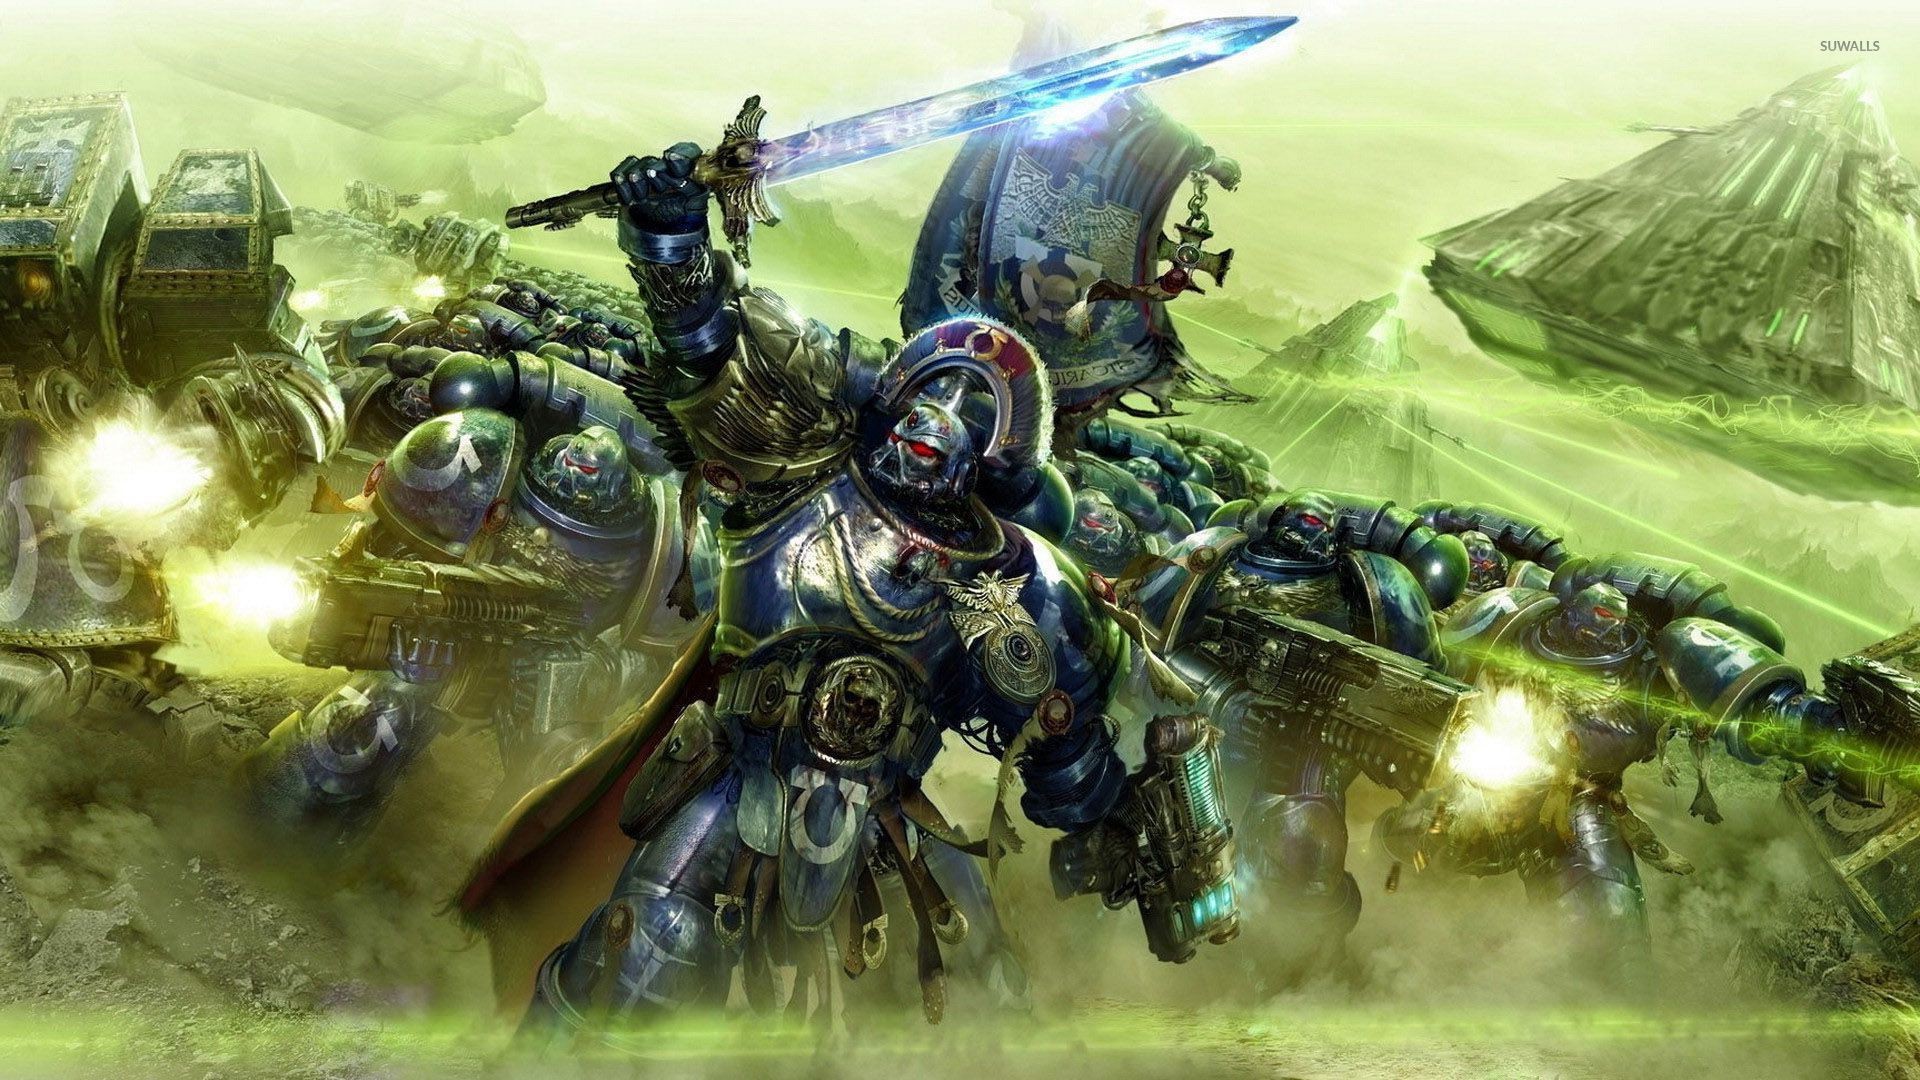 warhammer 40k wallpaper hd,action adventure game,strategy video game,pc game,mecha,games